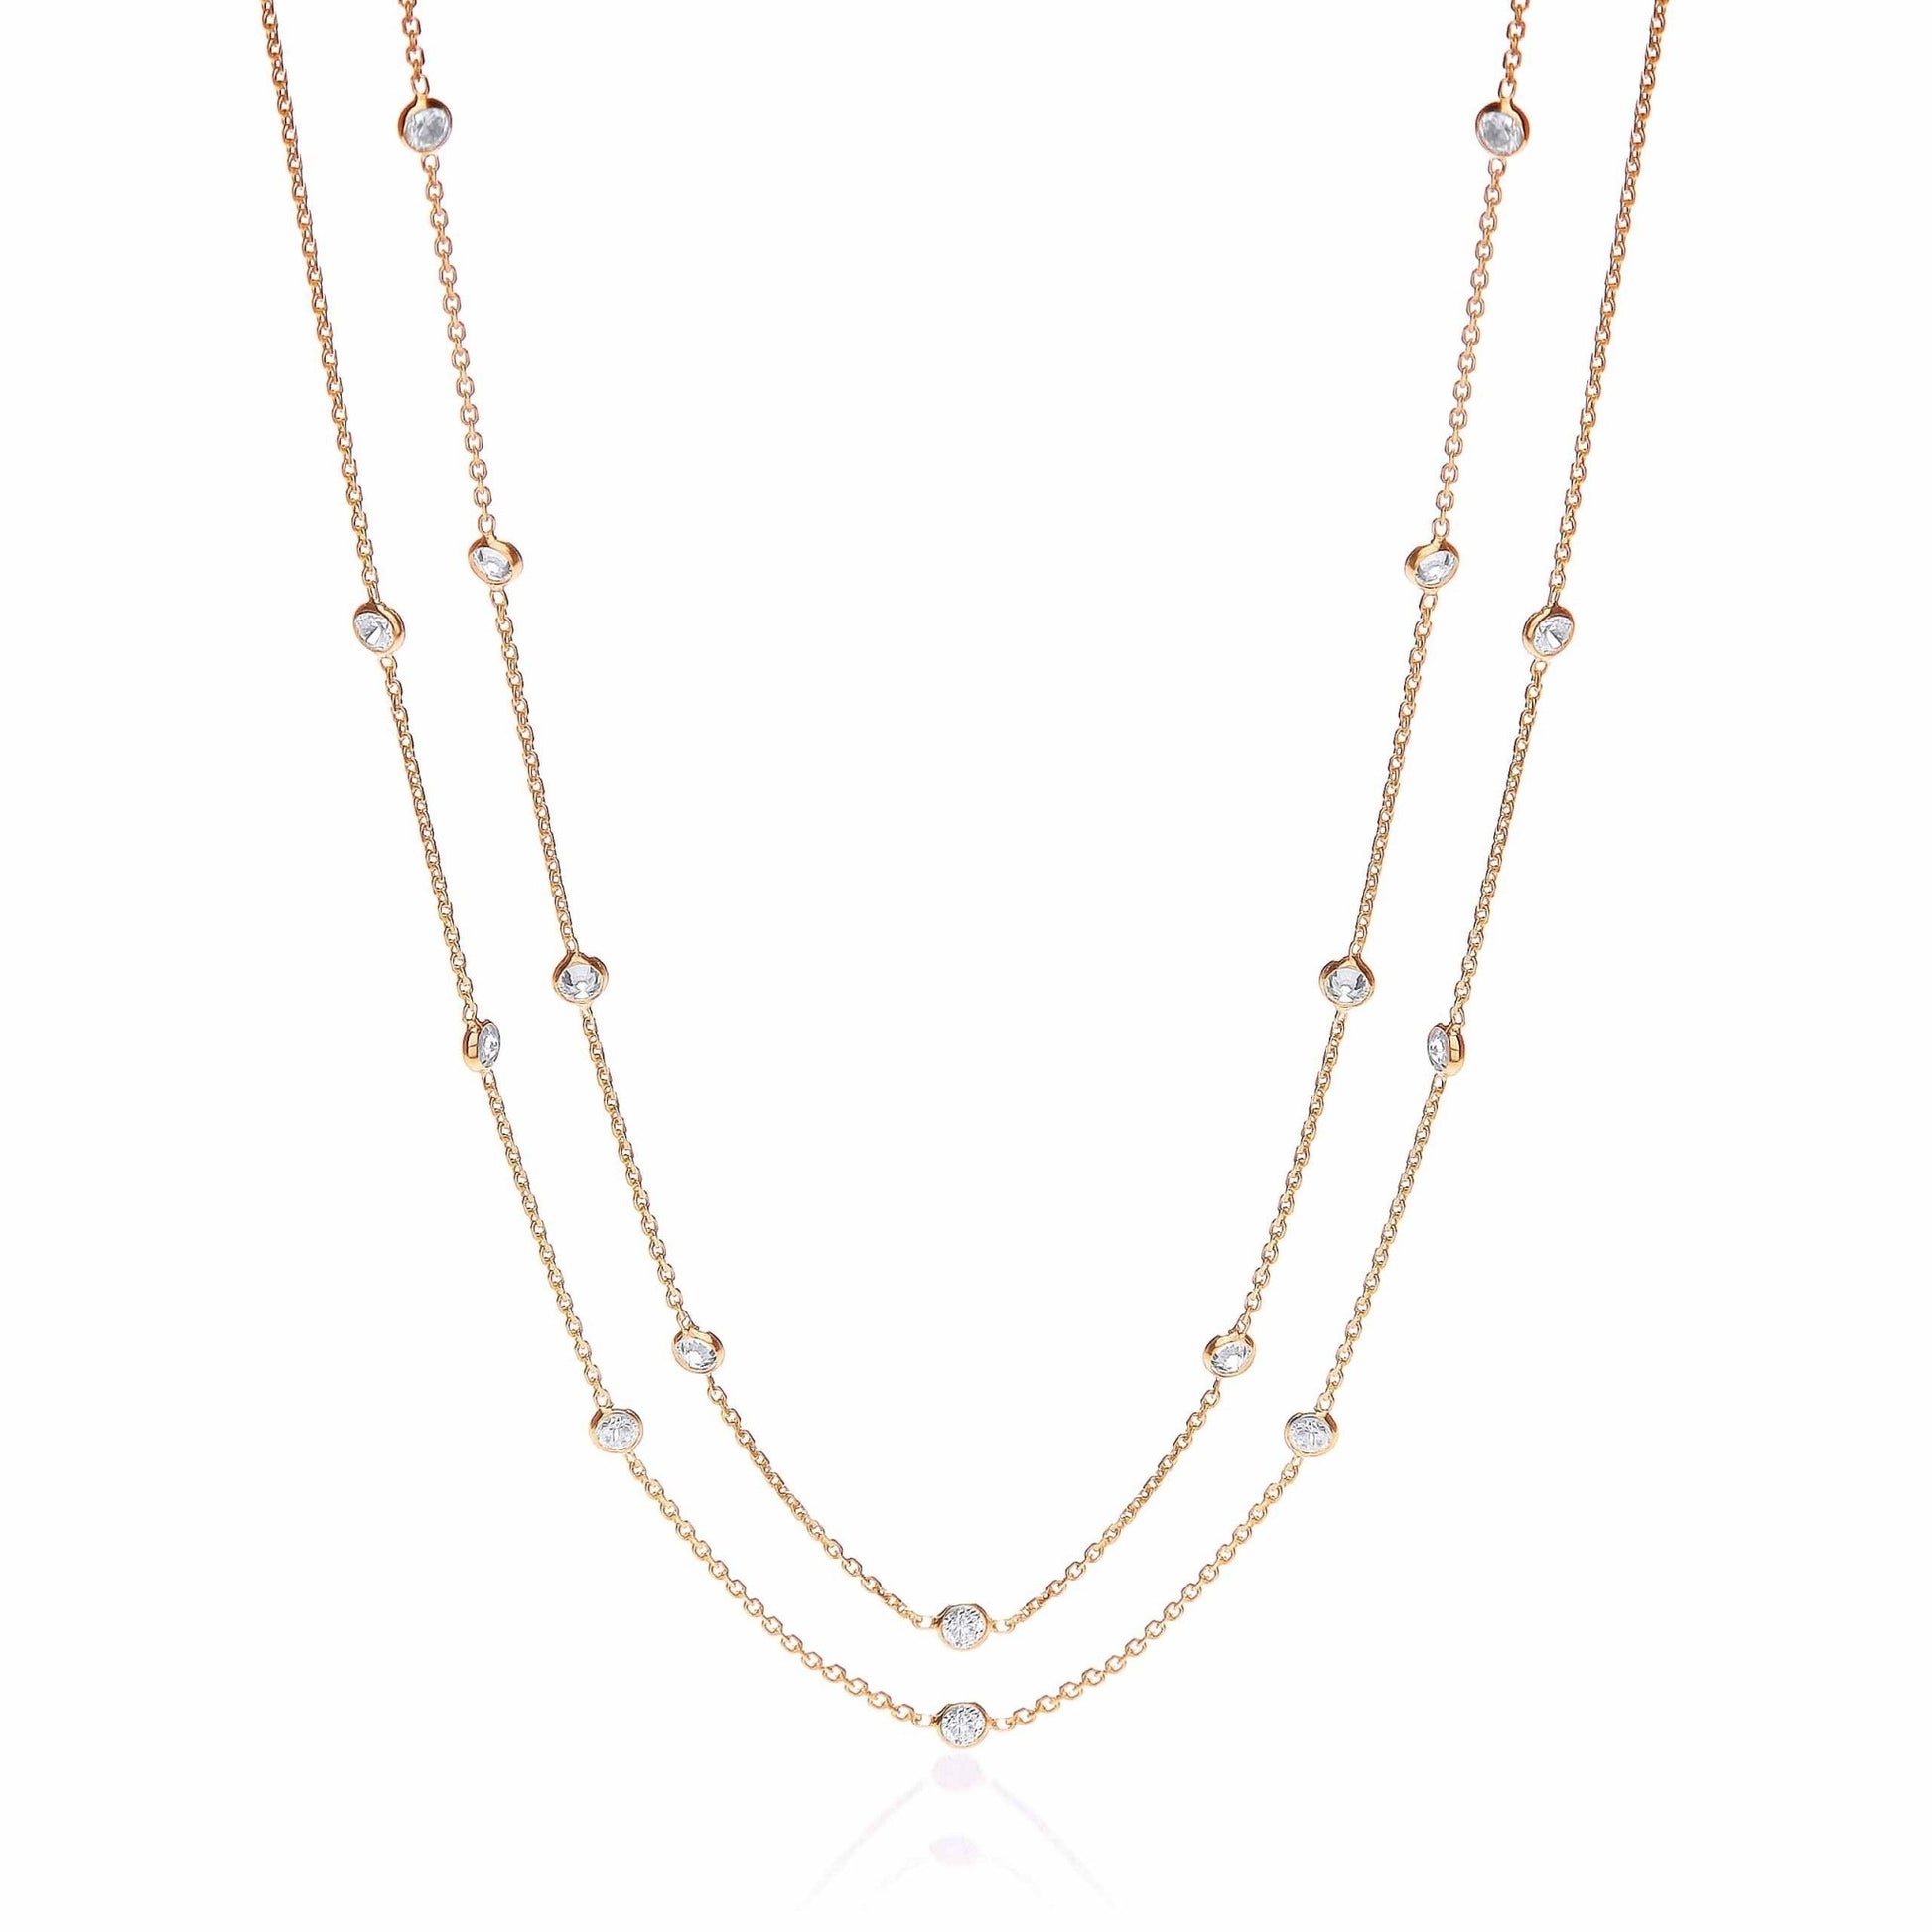 925 Sterling Silver Double Chain Necklace Set With CZ 38" - FJewellery